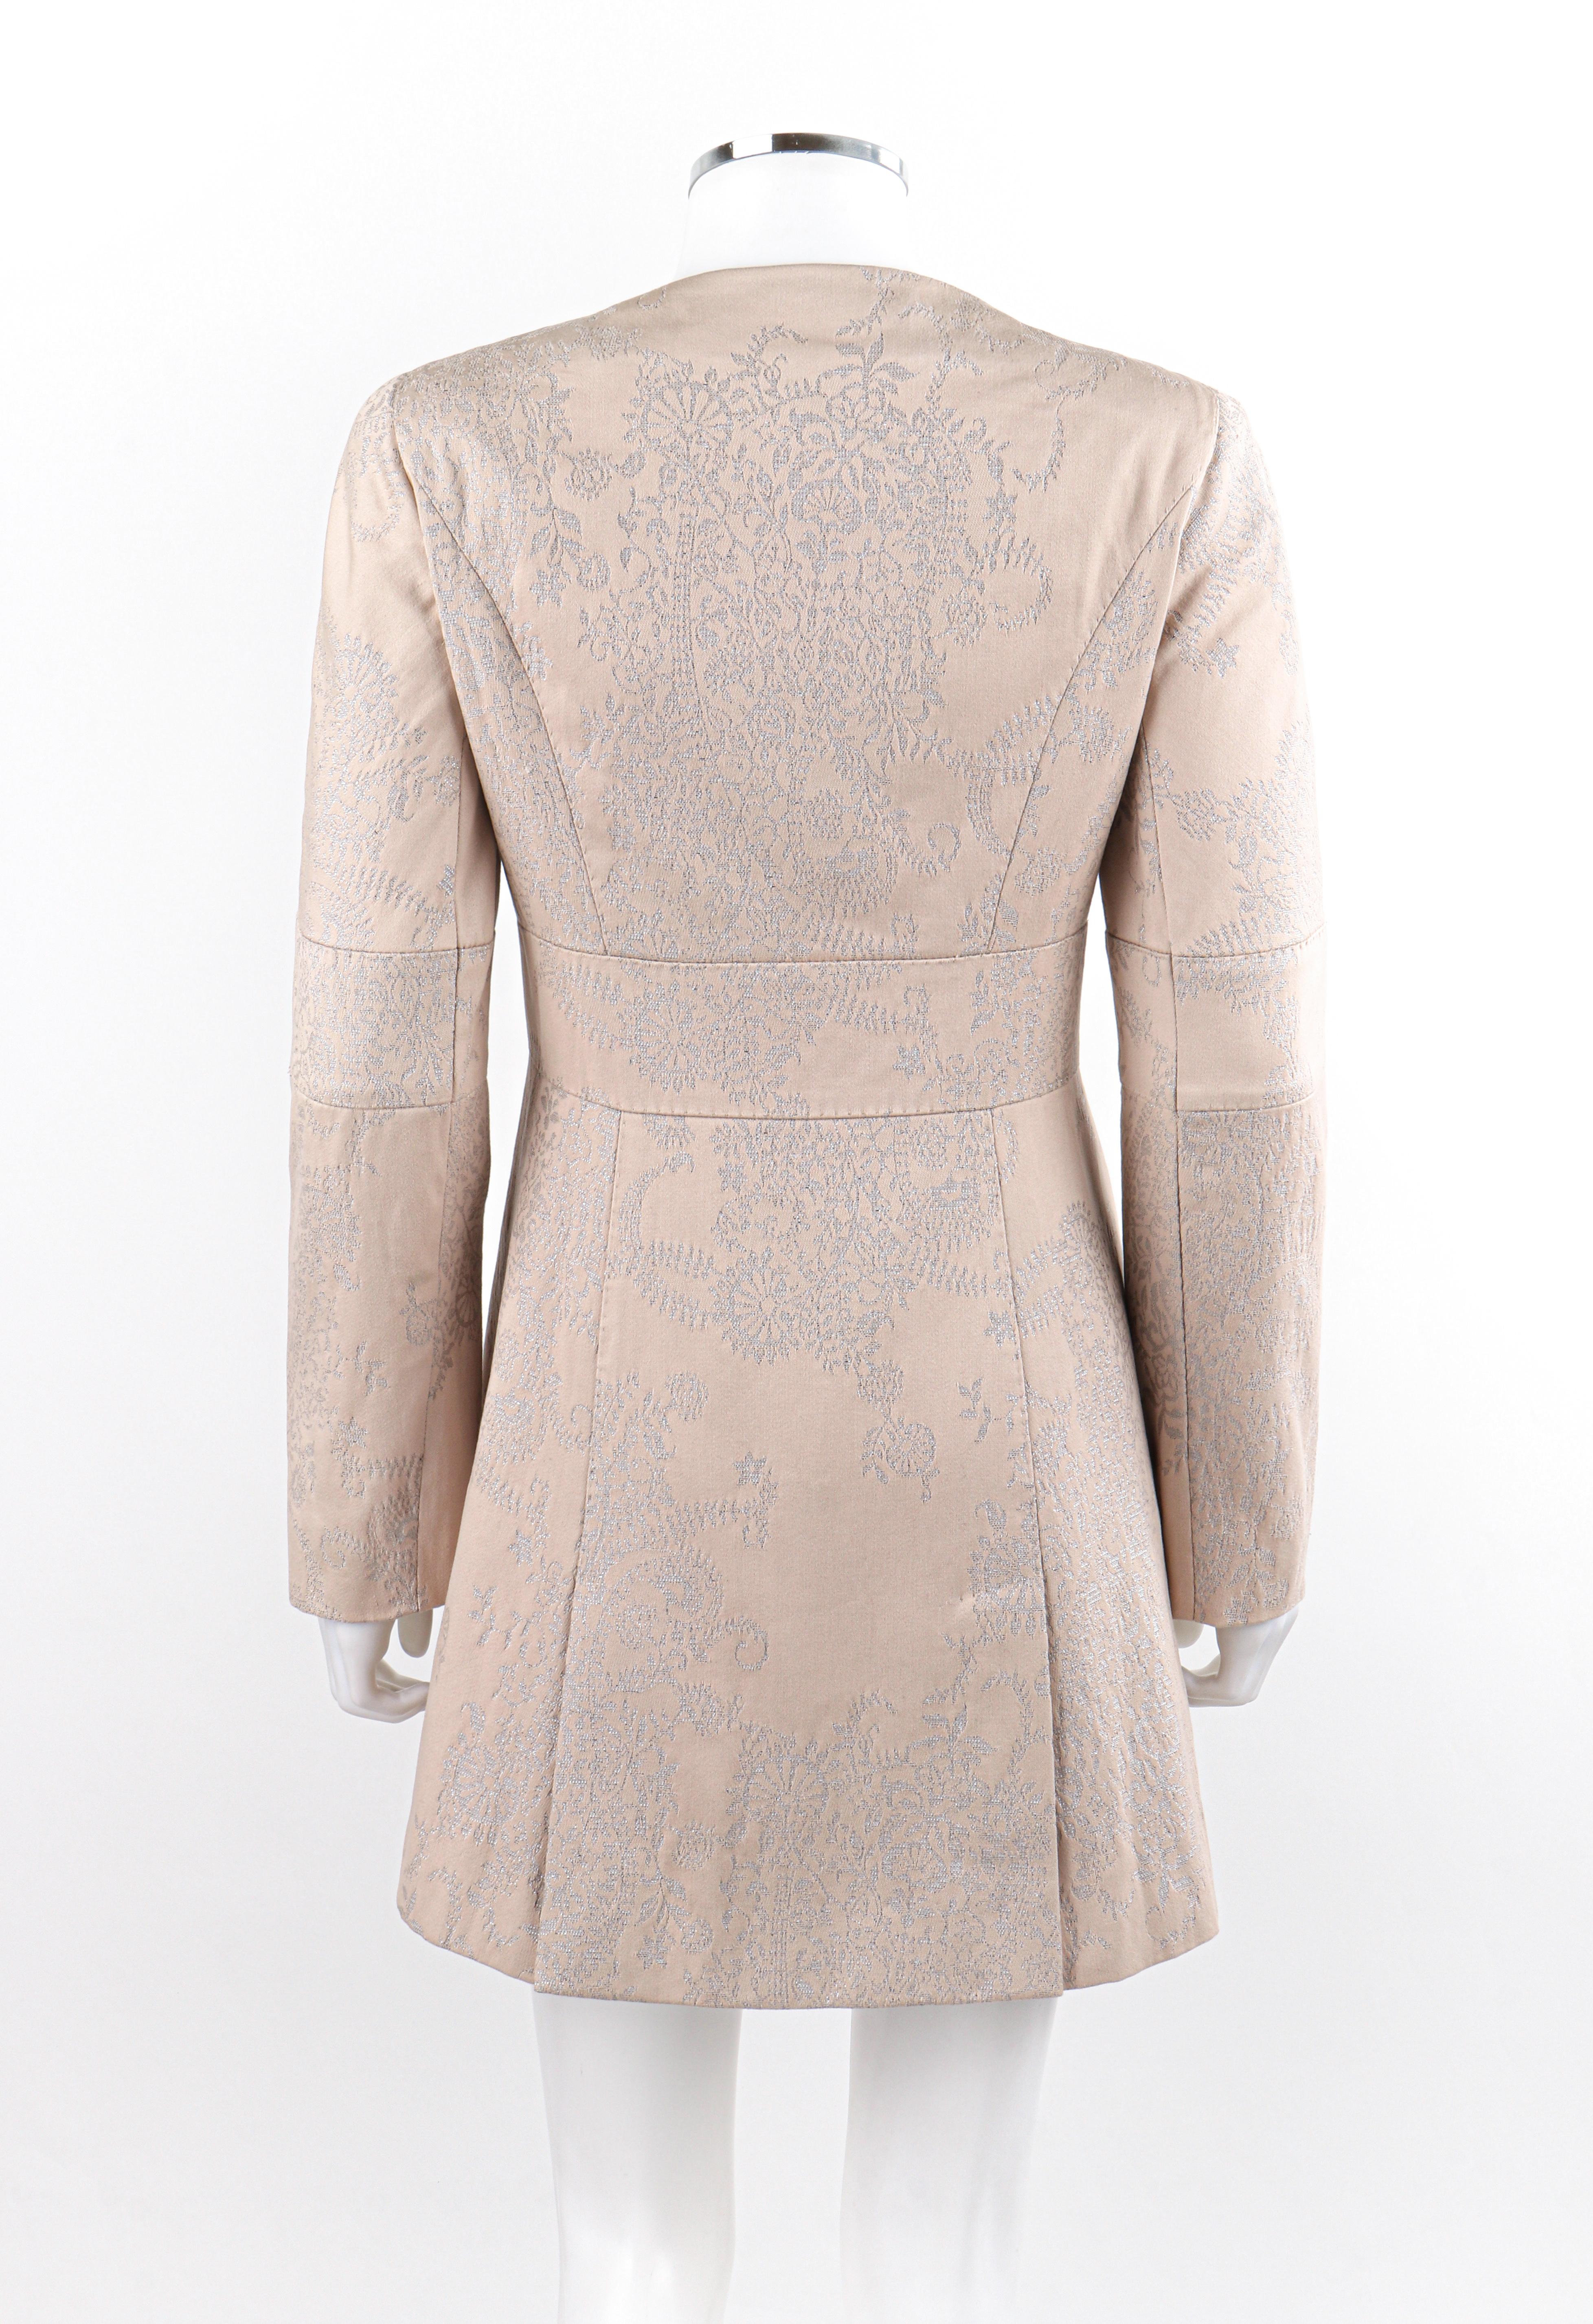 ALEXANDER McQUEEN A/W 2004 “Pantheom as Lecum” Pink Metallic Embroidered Coat For Sale 1